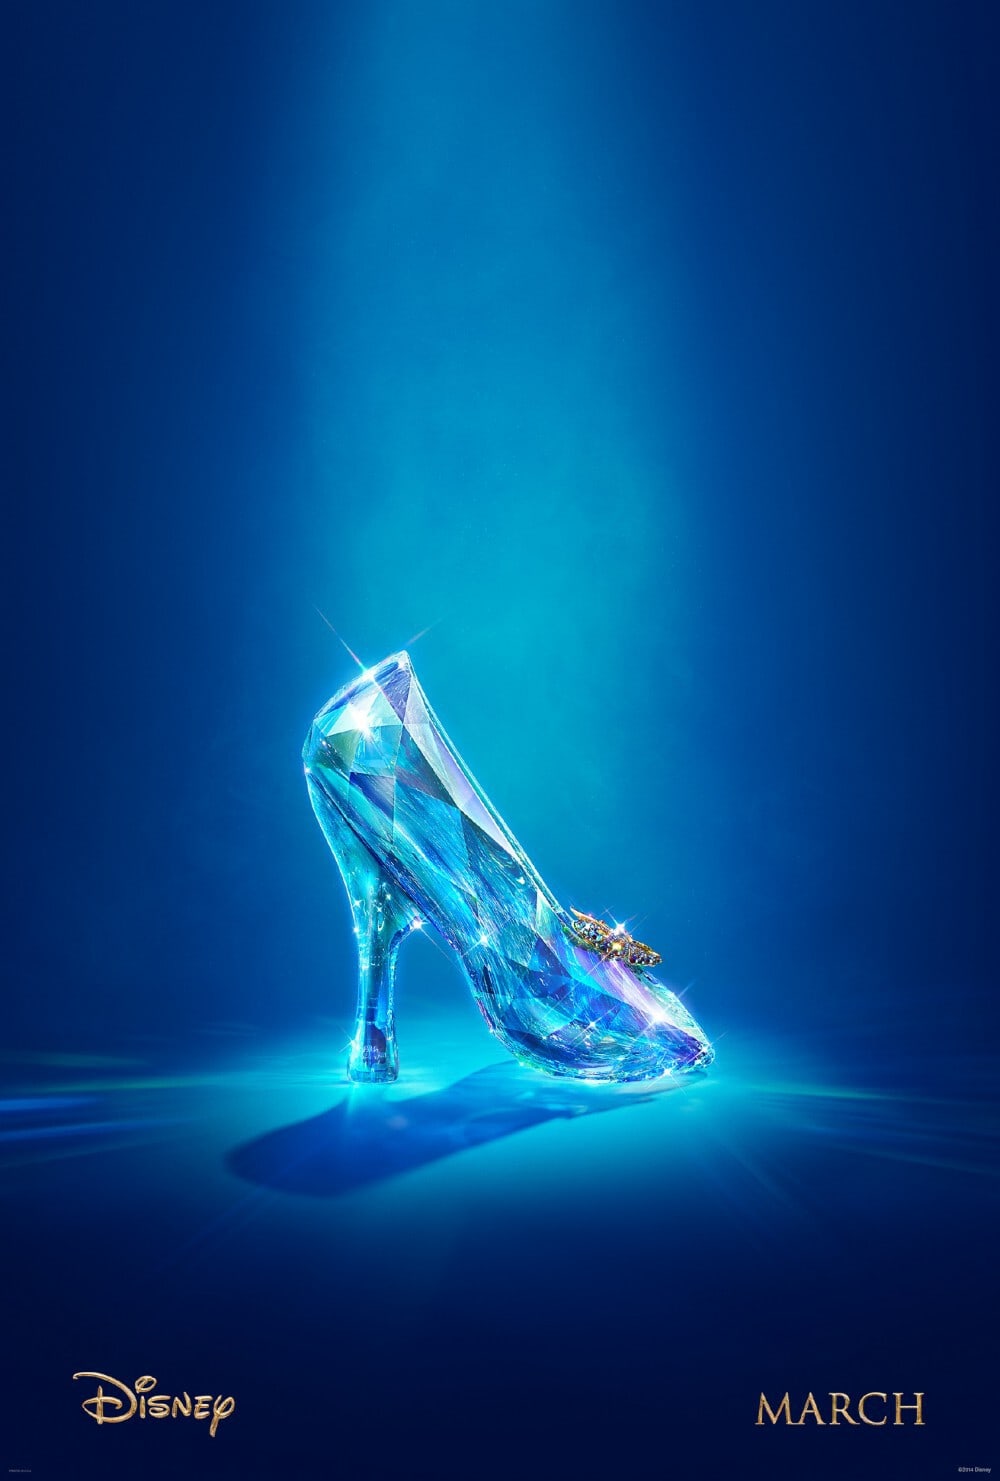 Disney’s CINDERELLA Teaser Trailer and Poster Now Available